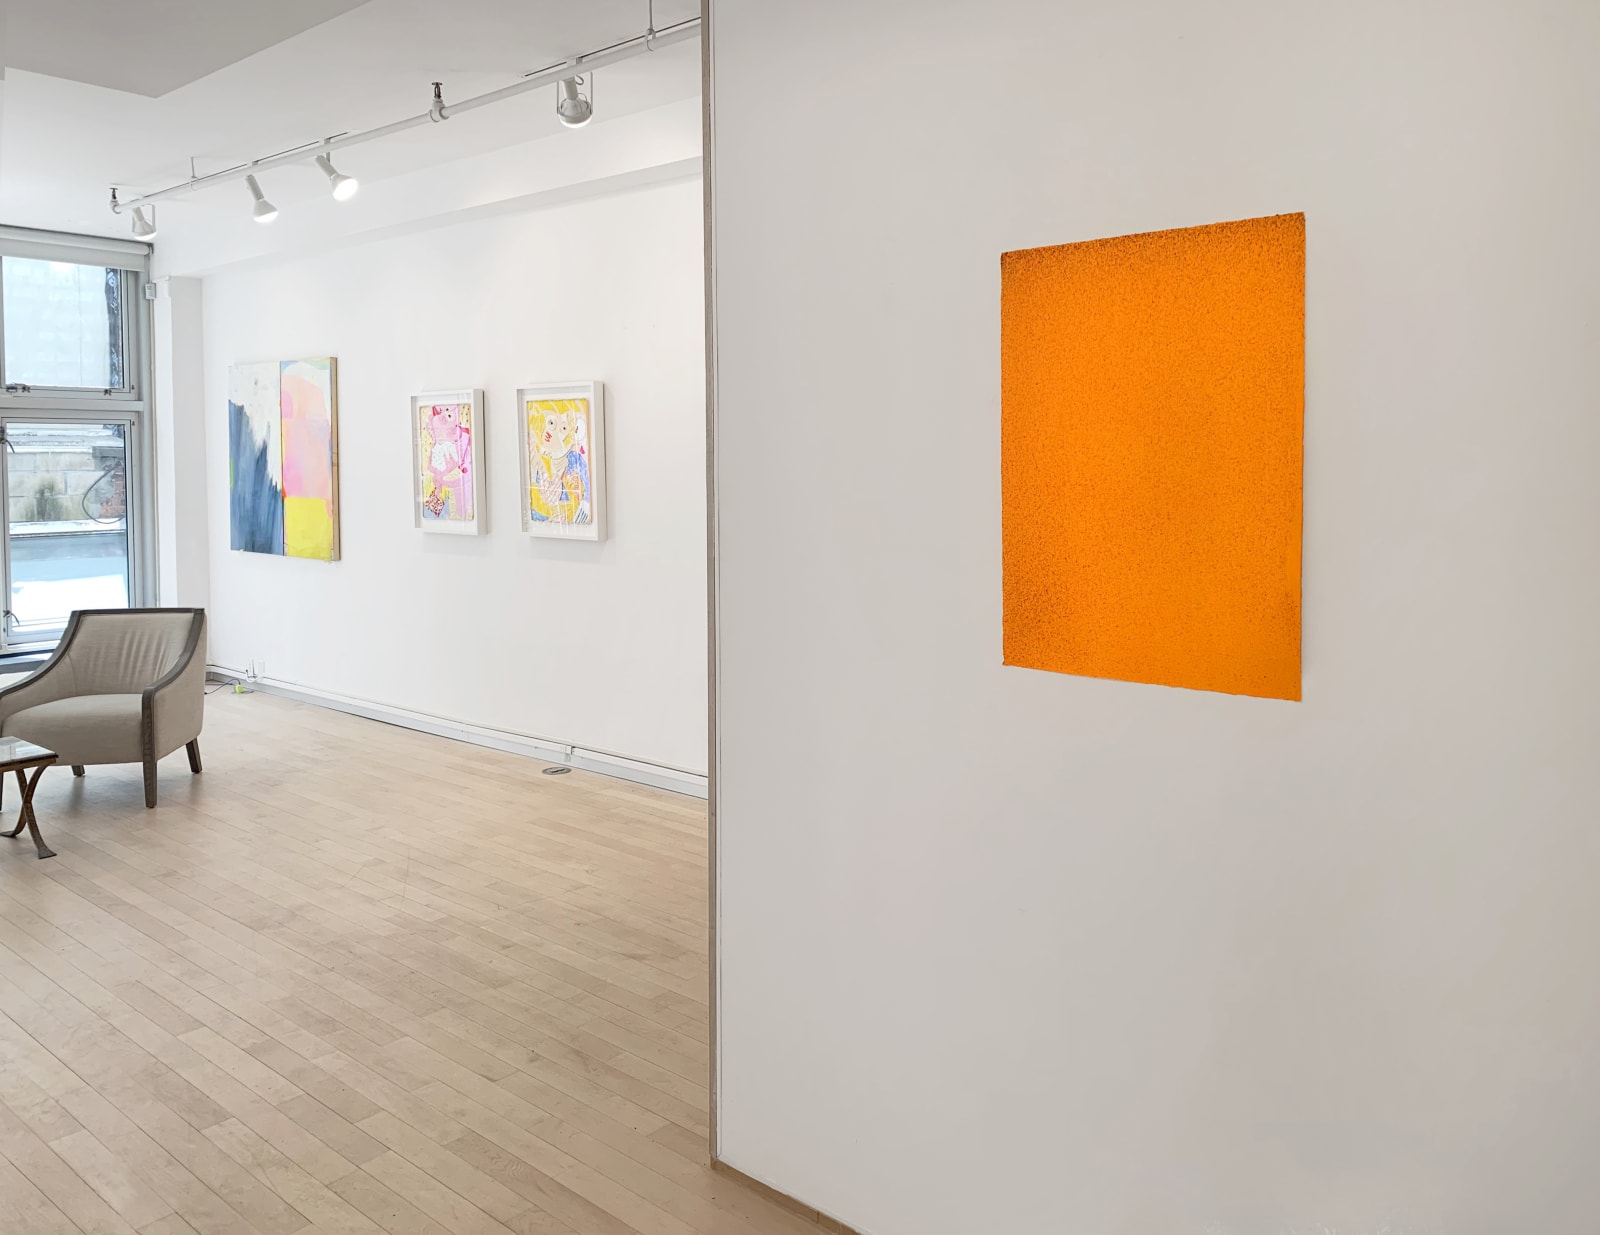 Installation view: Taggart Times 7